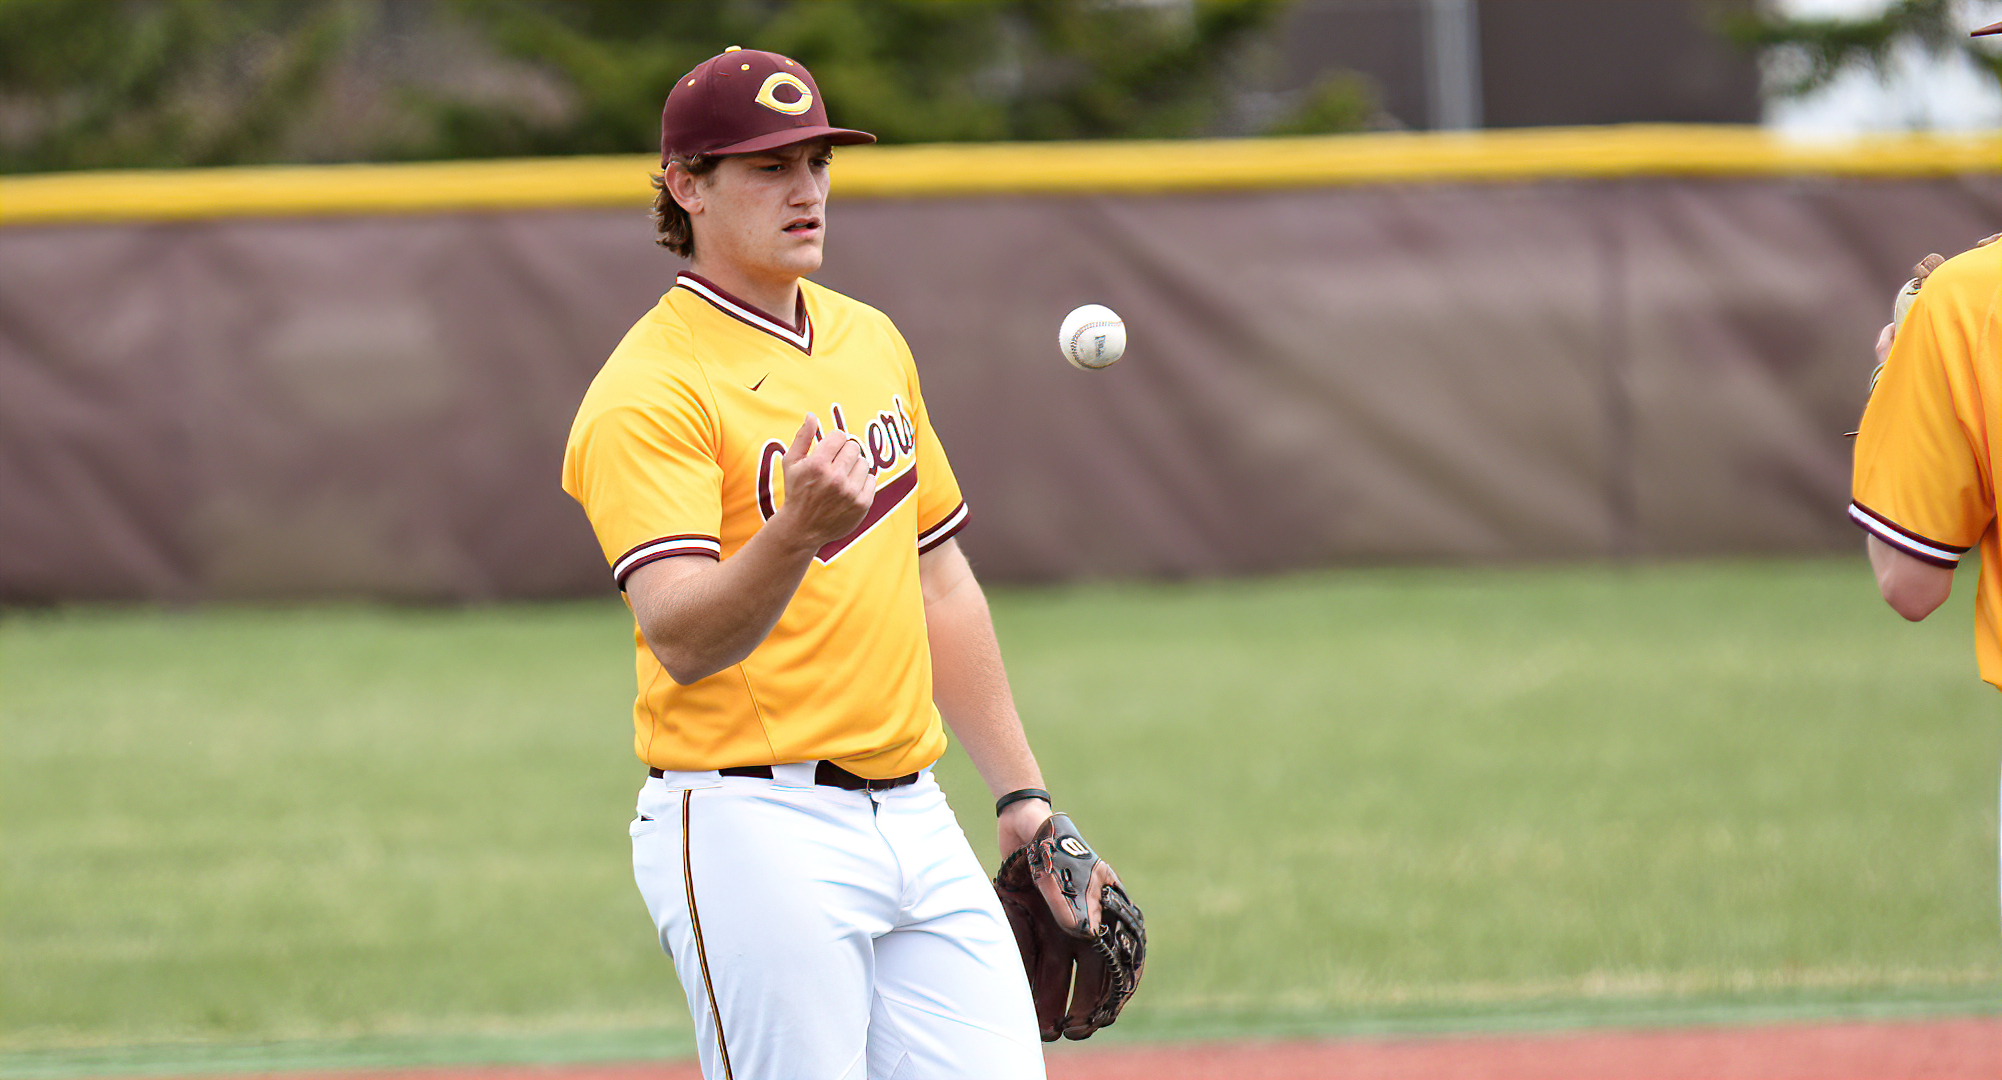 Concordia infielder Sean McGuire is one of the reasons the Cobbers are making their first appearance in the MIAC baseball playoffs since 2015.